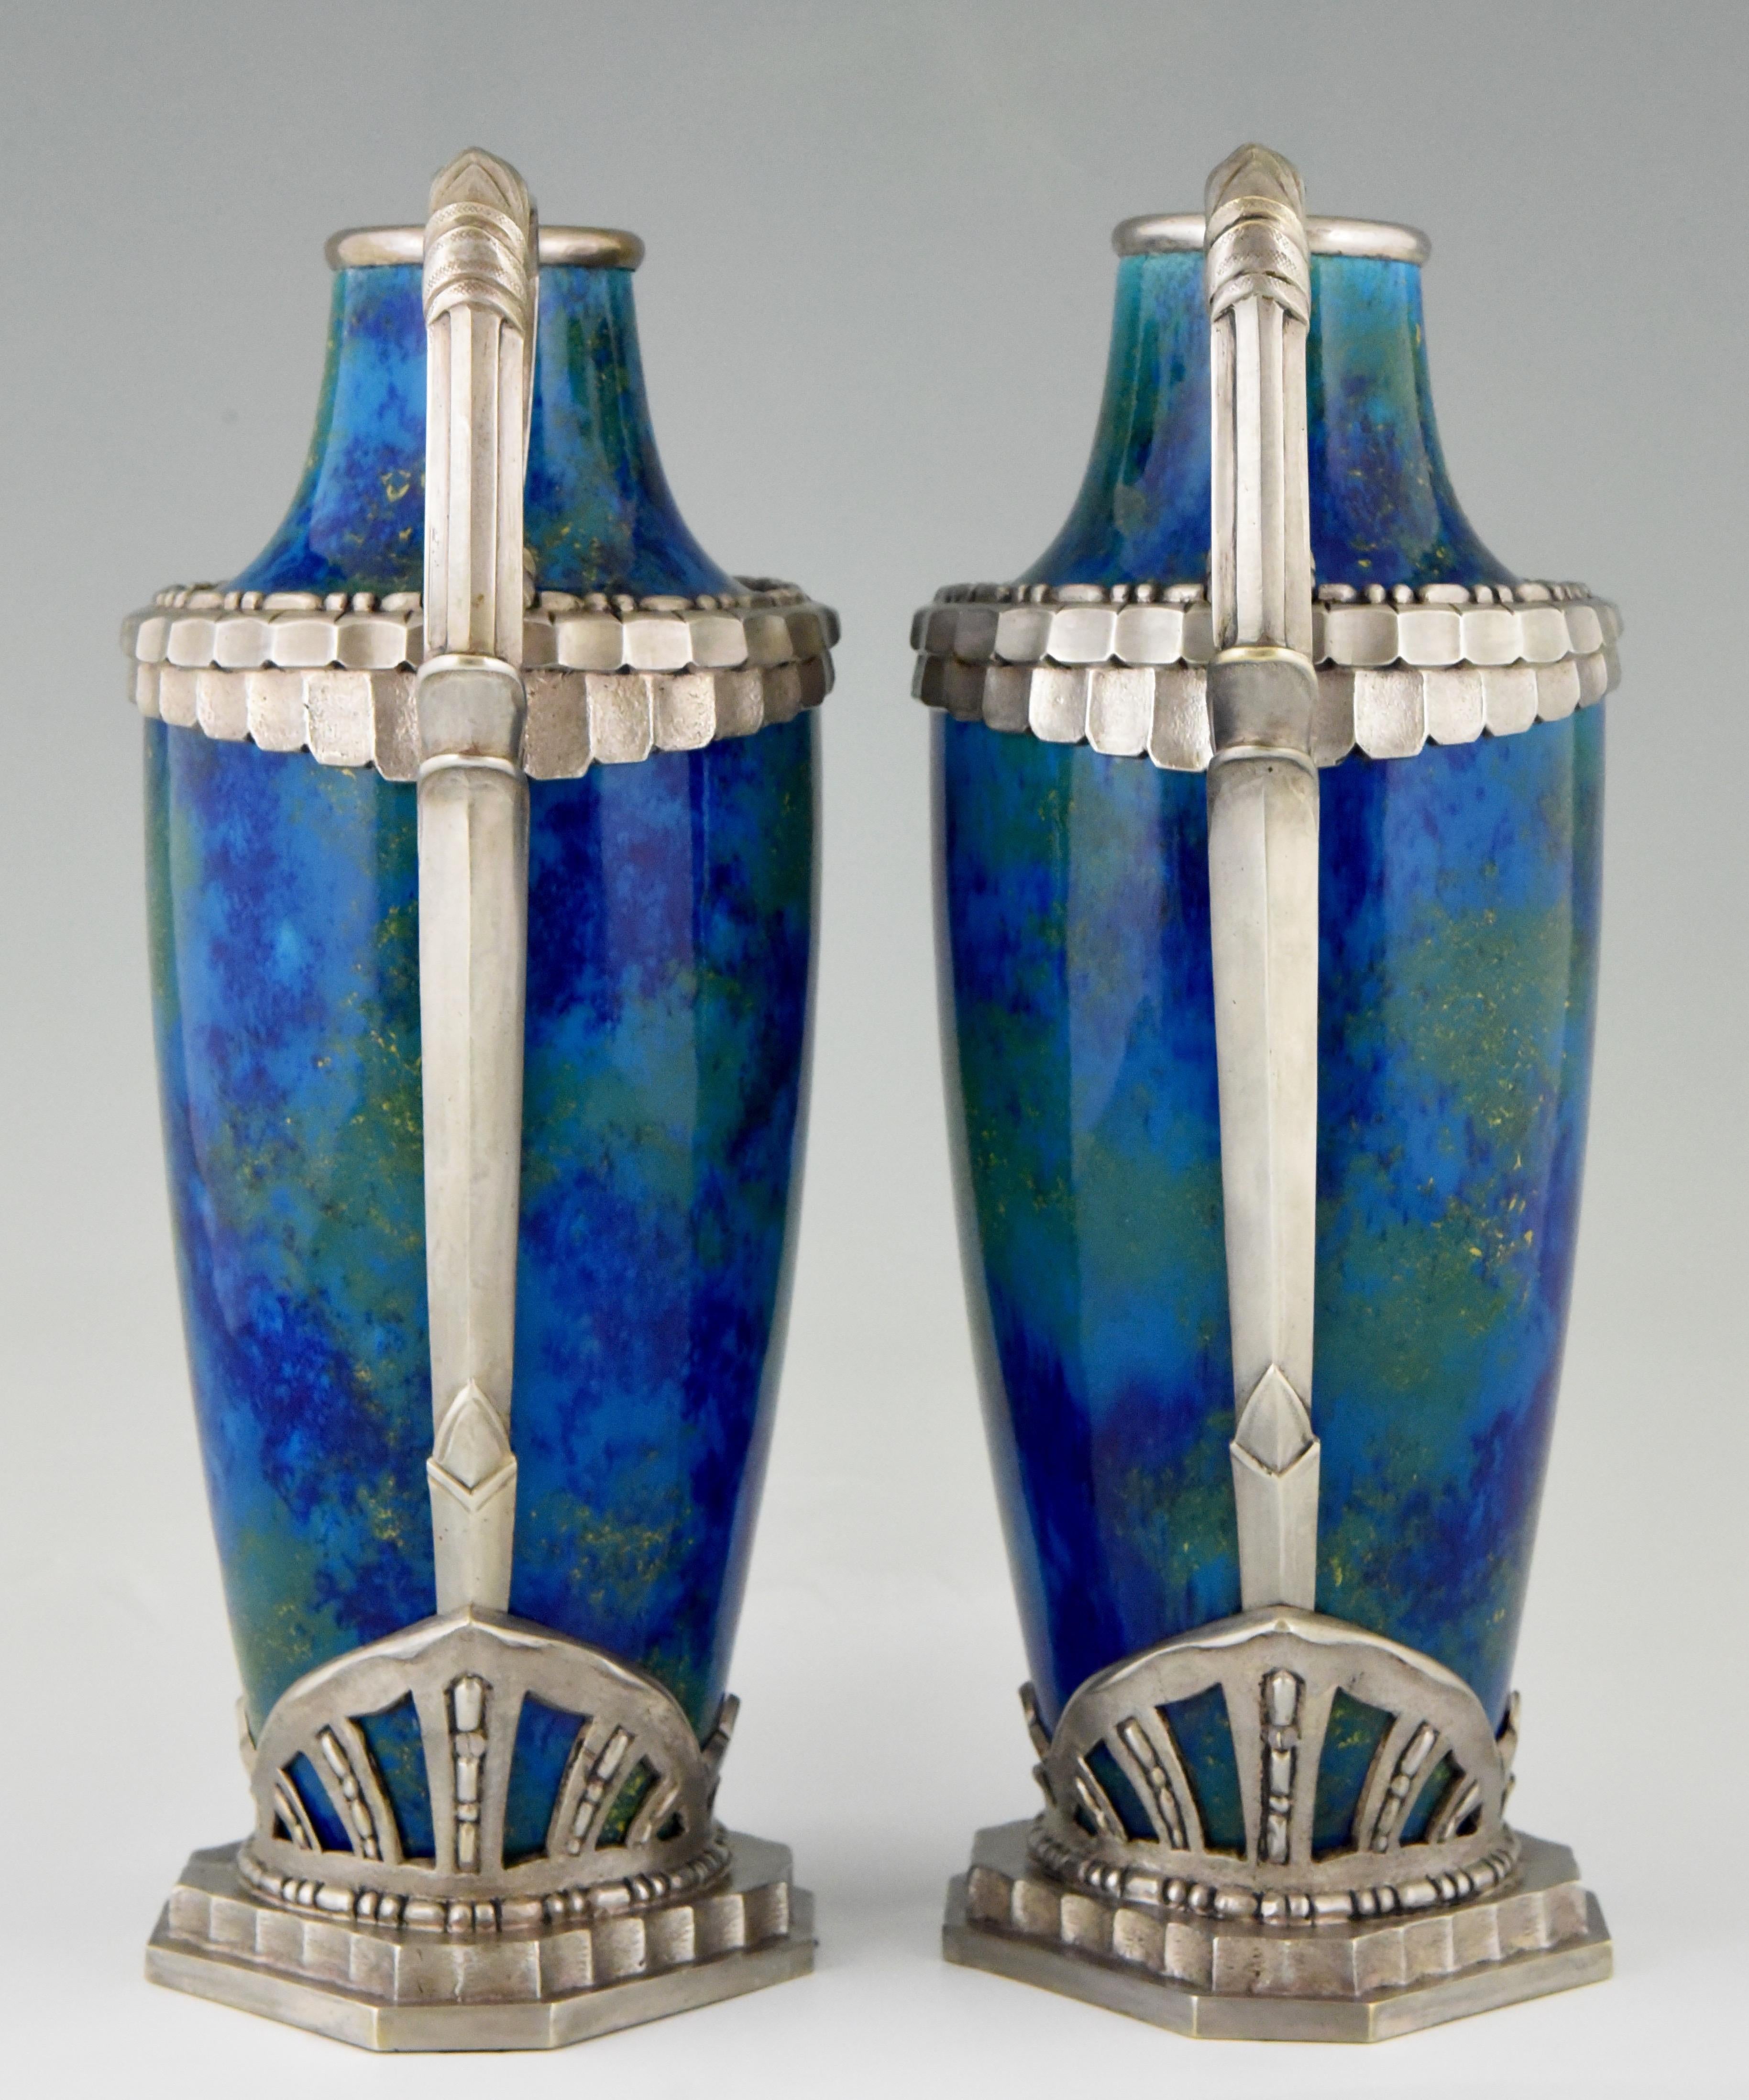 Silvered Pair of Art Deco Blue Ceramic and Bronze Vases Paul Milet for Sevres 1920 France